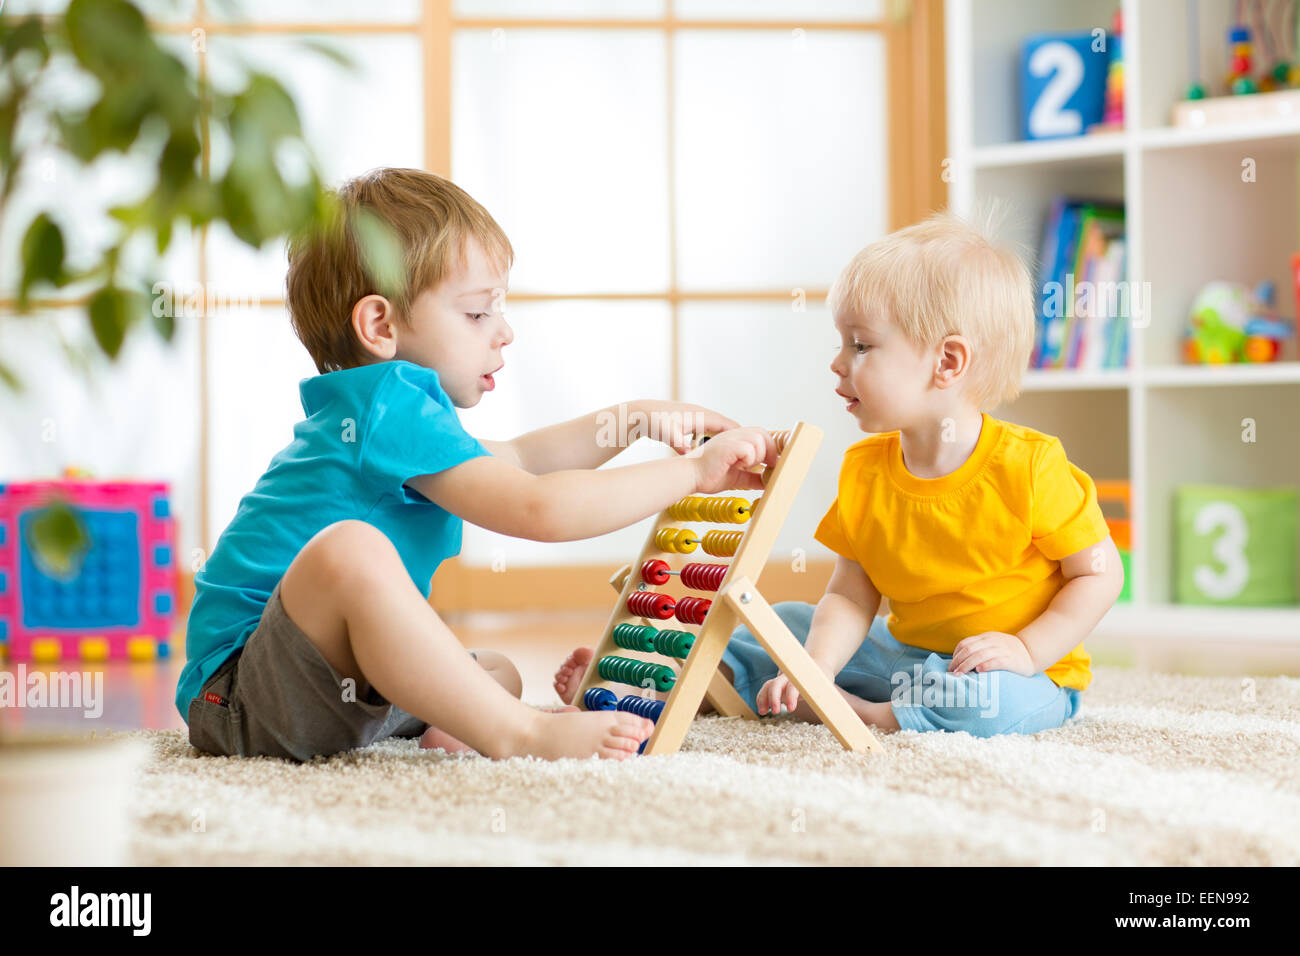 children boys playing with abacus Stock Photo